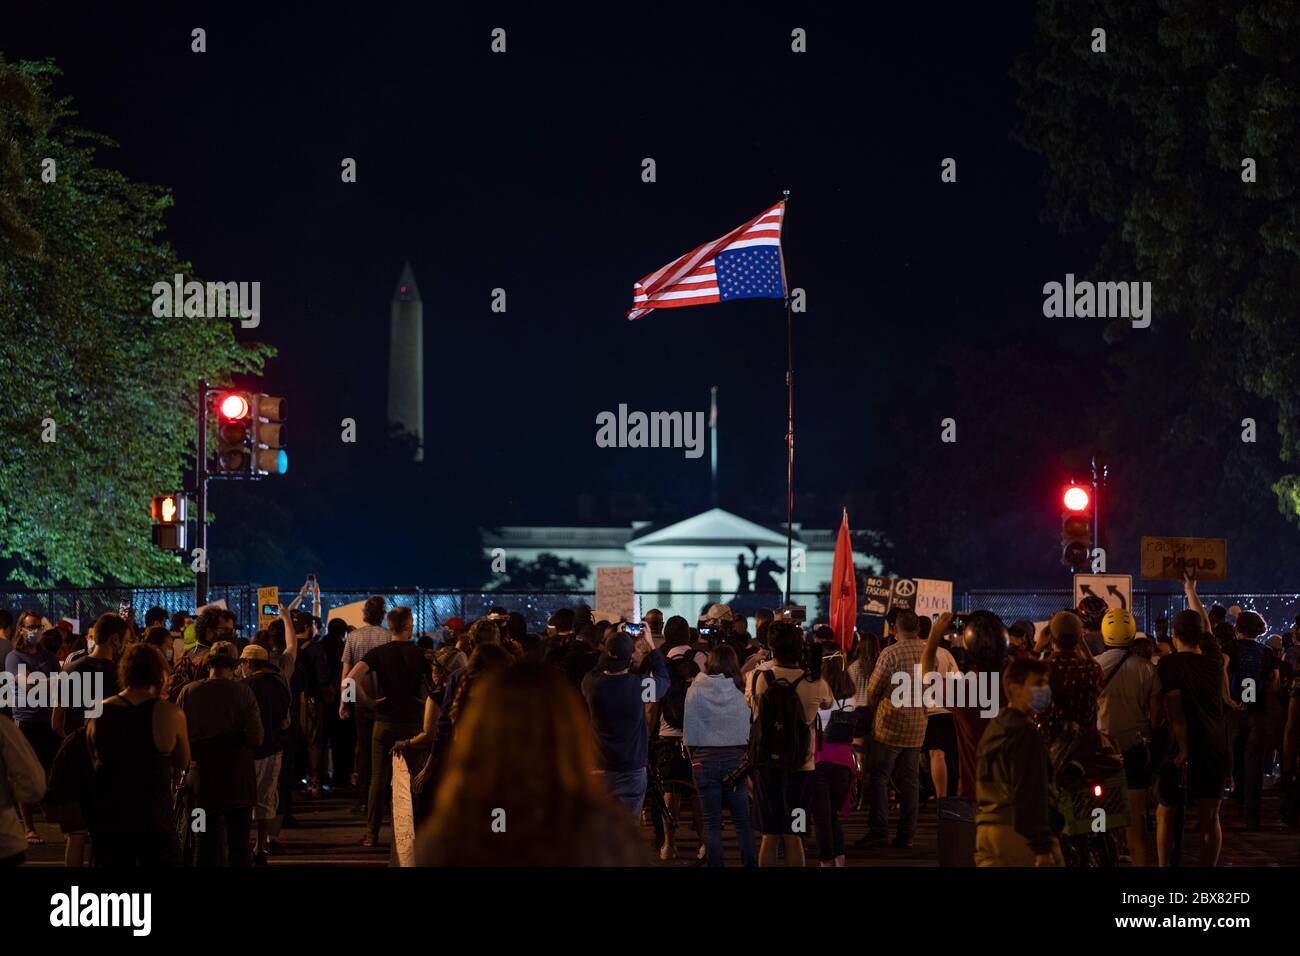 Washington, District of Columbia, USA. 5th June, 2020. A man waves an upside-down US flag within the crowd gathered near the White House on Friday, June 5, 2020, in Washington, District of Columbia. Credit: Sait Serkan Gurbuz/ZUMA Wire/Alamy Live News Stock Photo